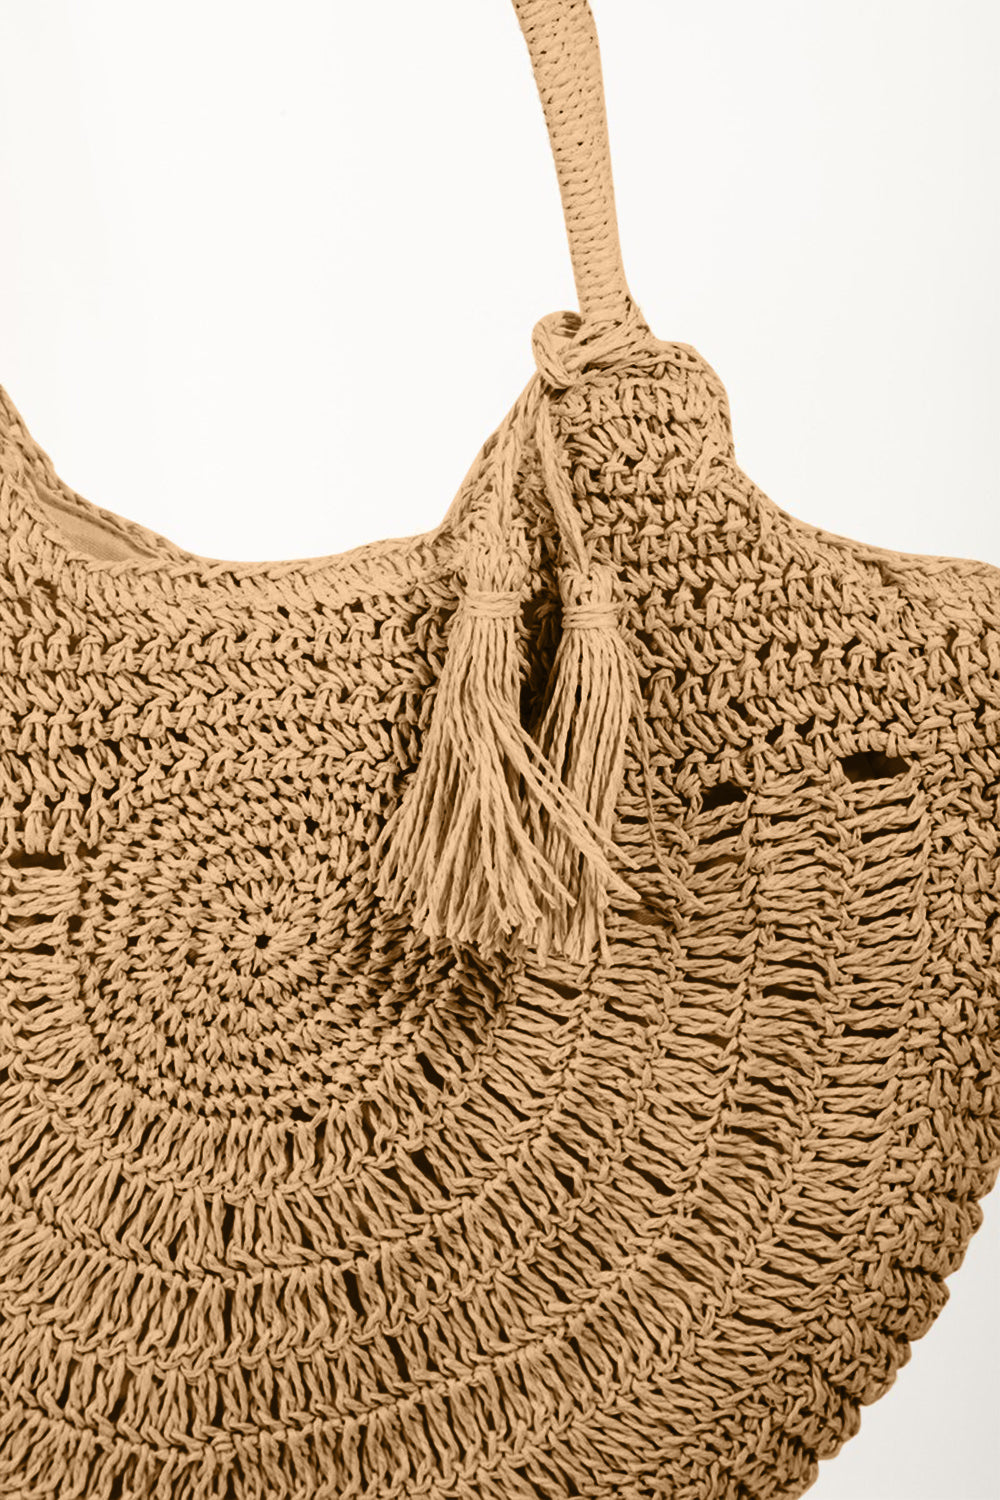 Straw Braided Tote Bag with Tassel is a charming and fashionable accessory that combines the natural texture of straw with a playful tassel detail. The braided design adds a touch of bohemian flair, perfect for summer days or beach outings. The tassel embellishment adds a fun and whimsical element to the overall look. 